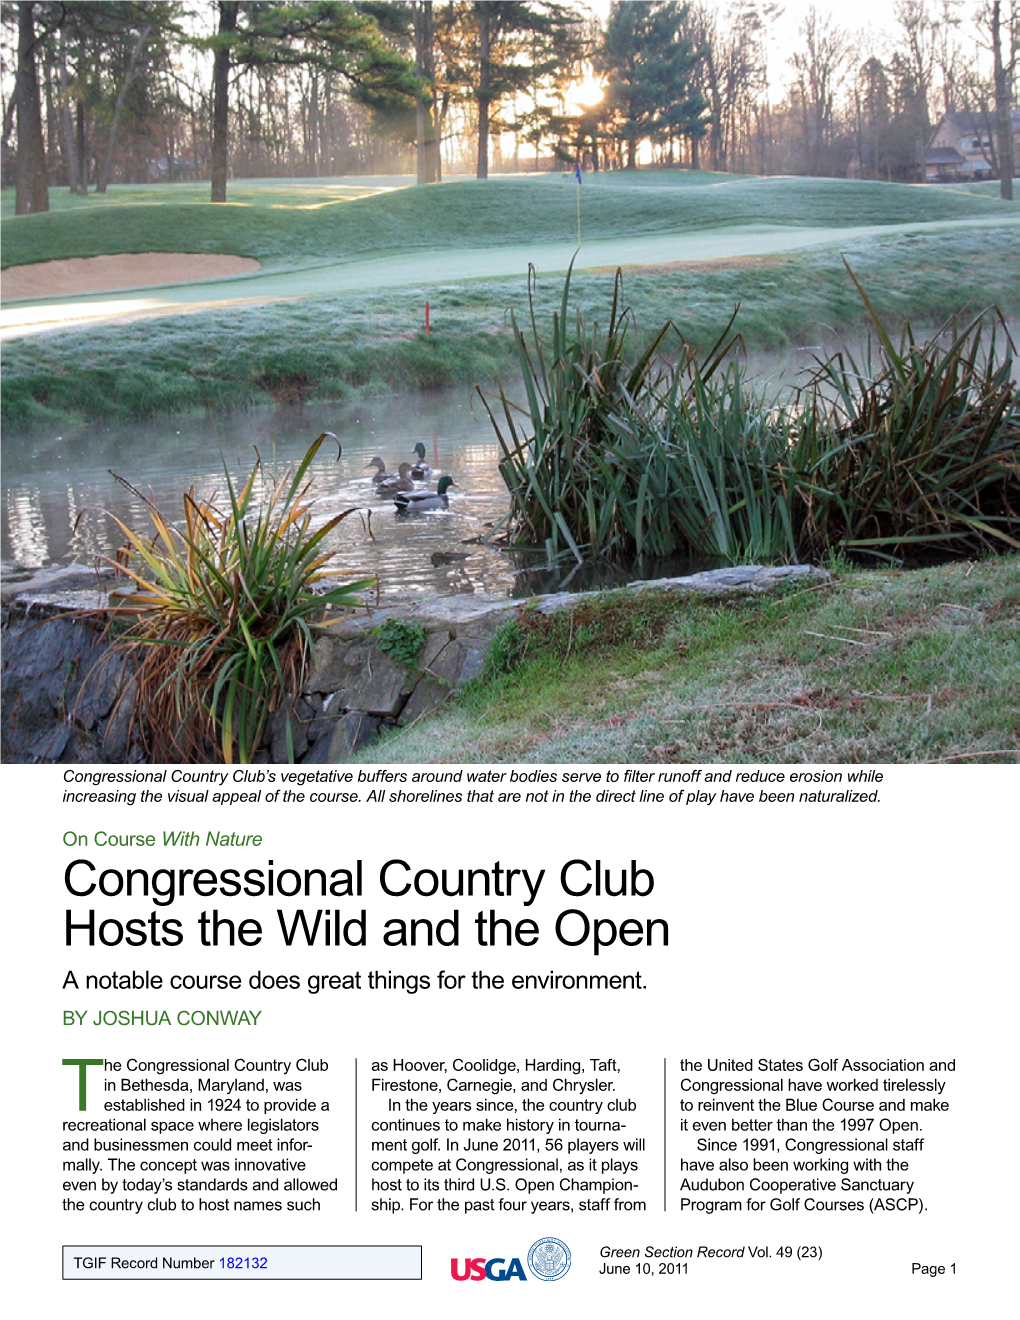 Congressional Country Club Hosts the Wild and the Open a Notable Course Does Great Things for the Environment